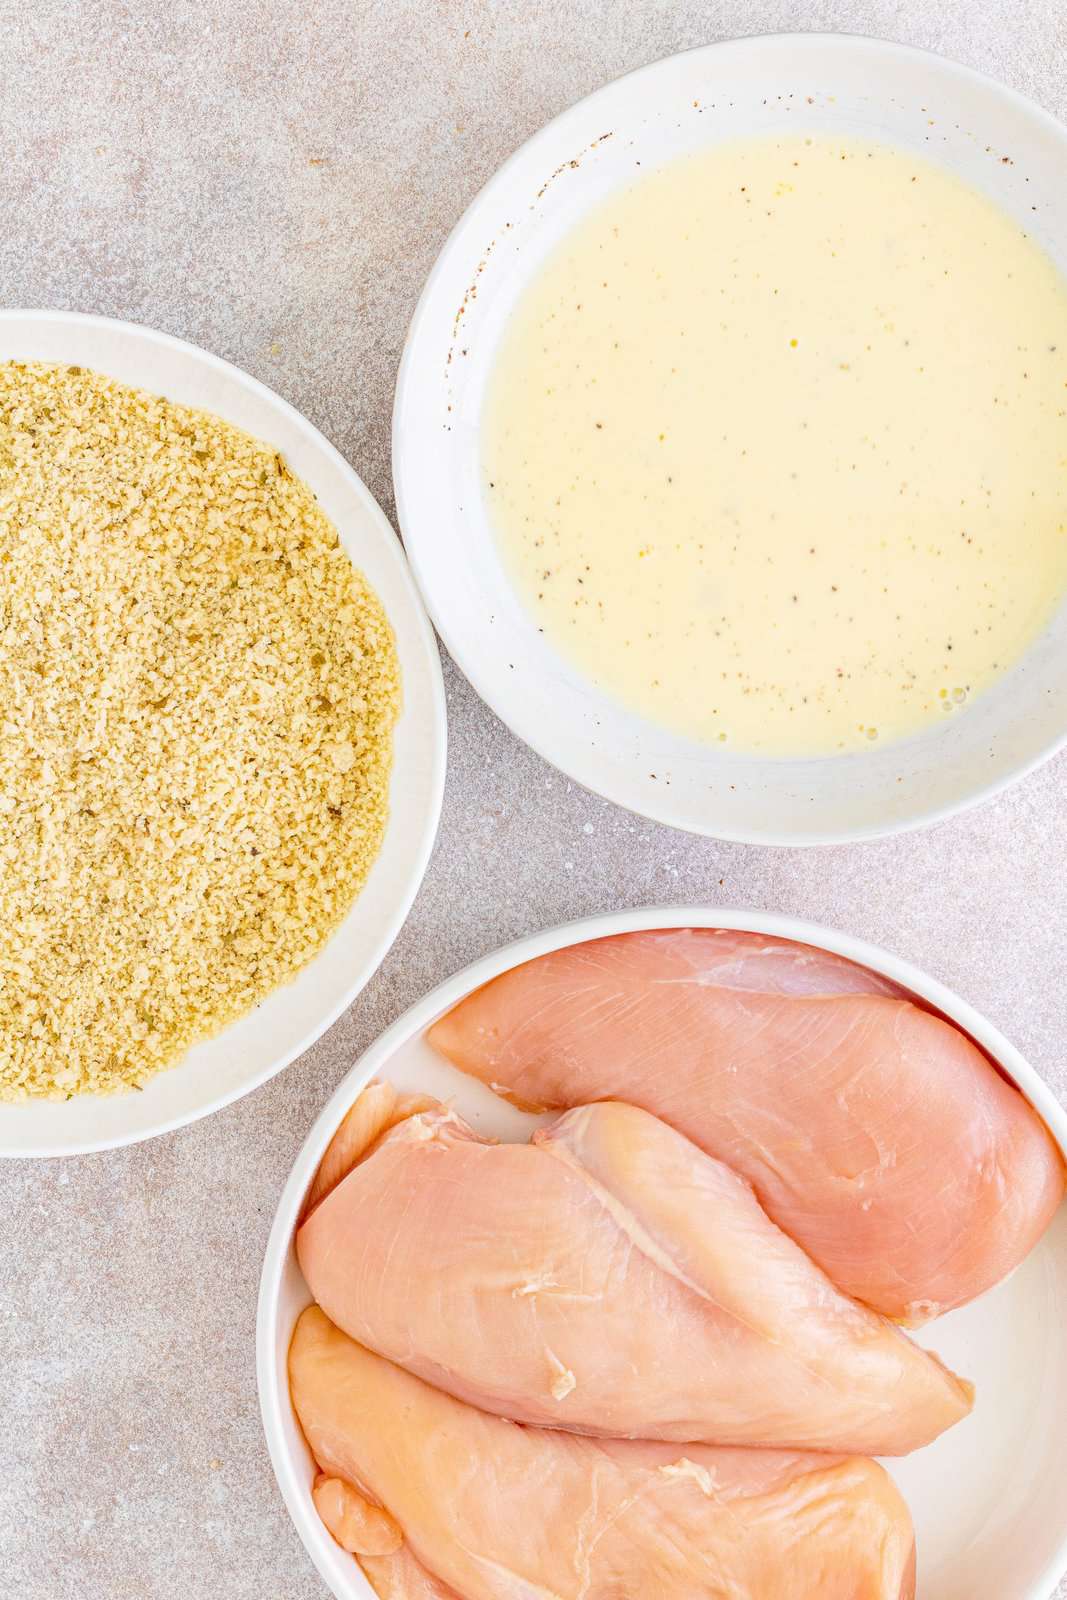 chicken in a bowl, panko bread crumbs in a separate bowl and egg/milk mixture in a third bowl.